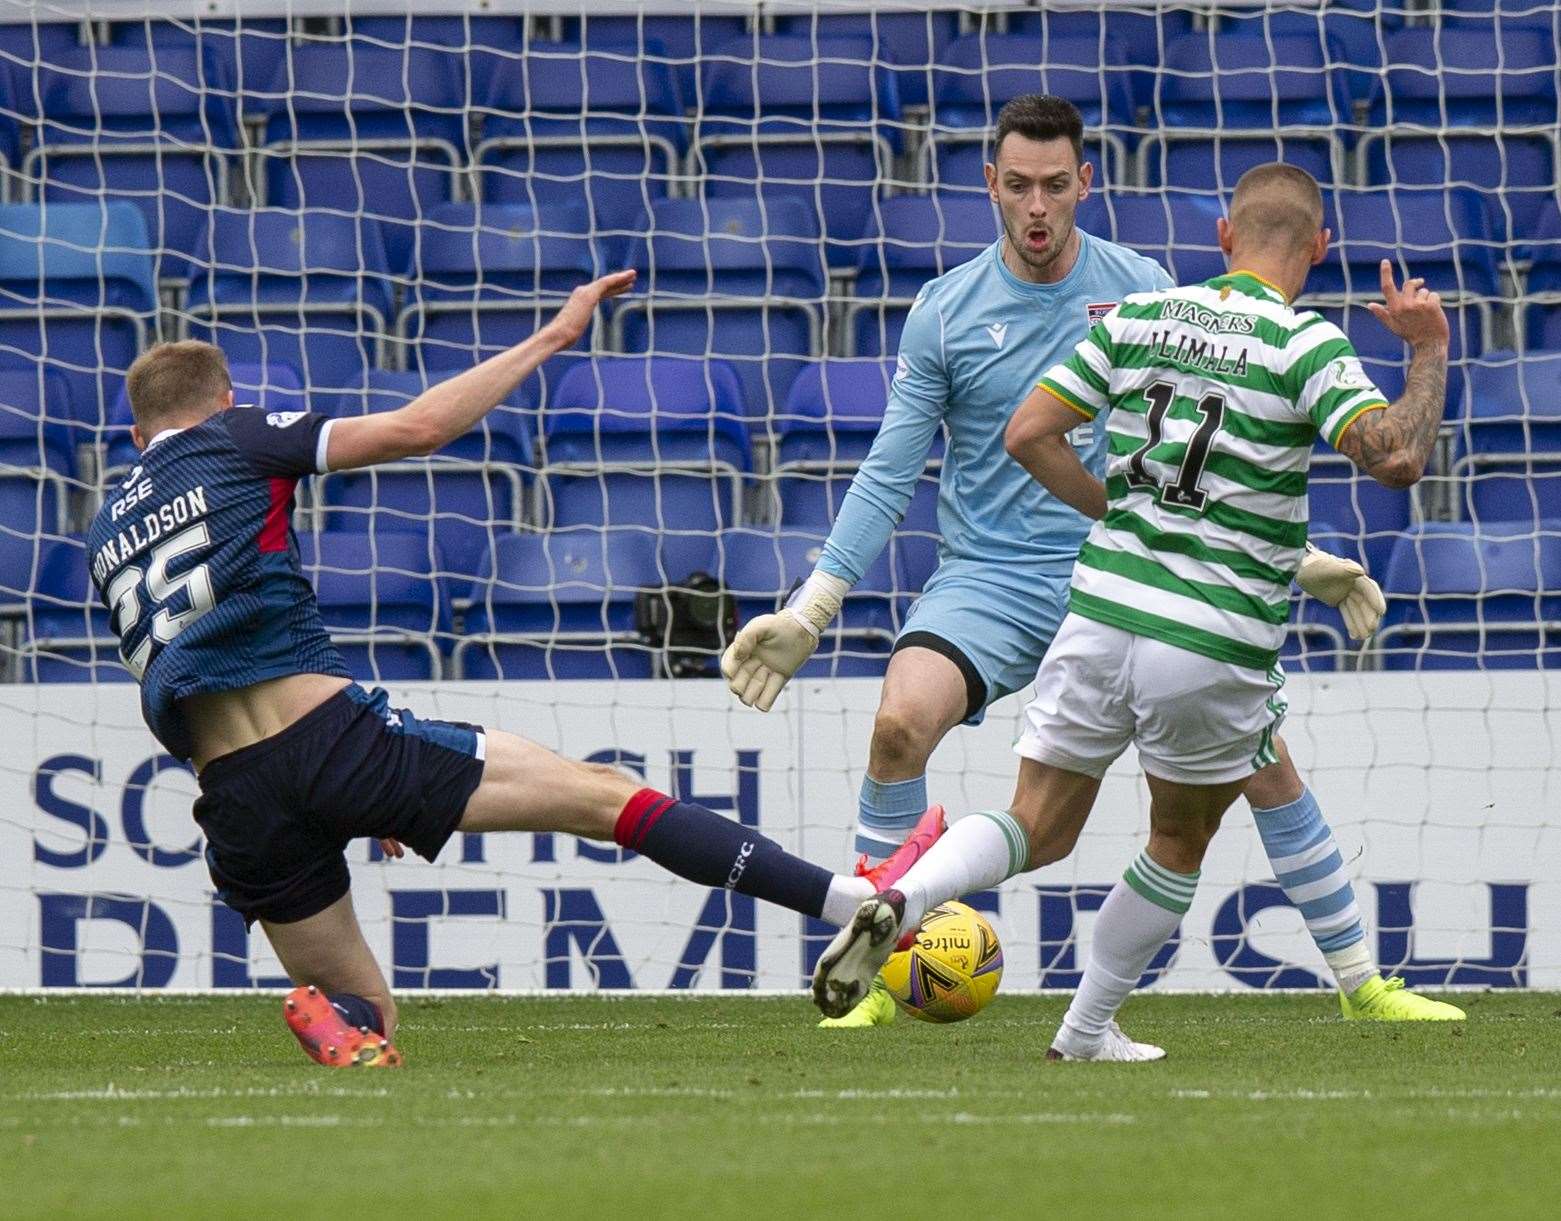 Ross County keeper Ross Laidlaw, who is backed by understudies Ross Doohan and Ross Munro, readies for a Patryk Klimala strike against Celtic.